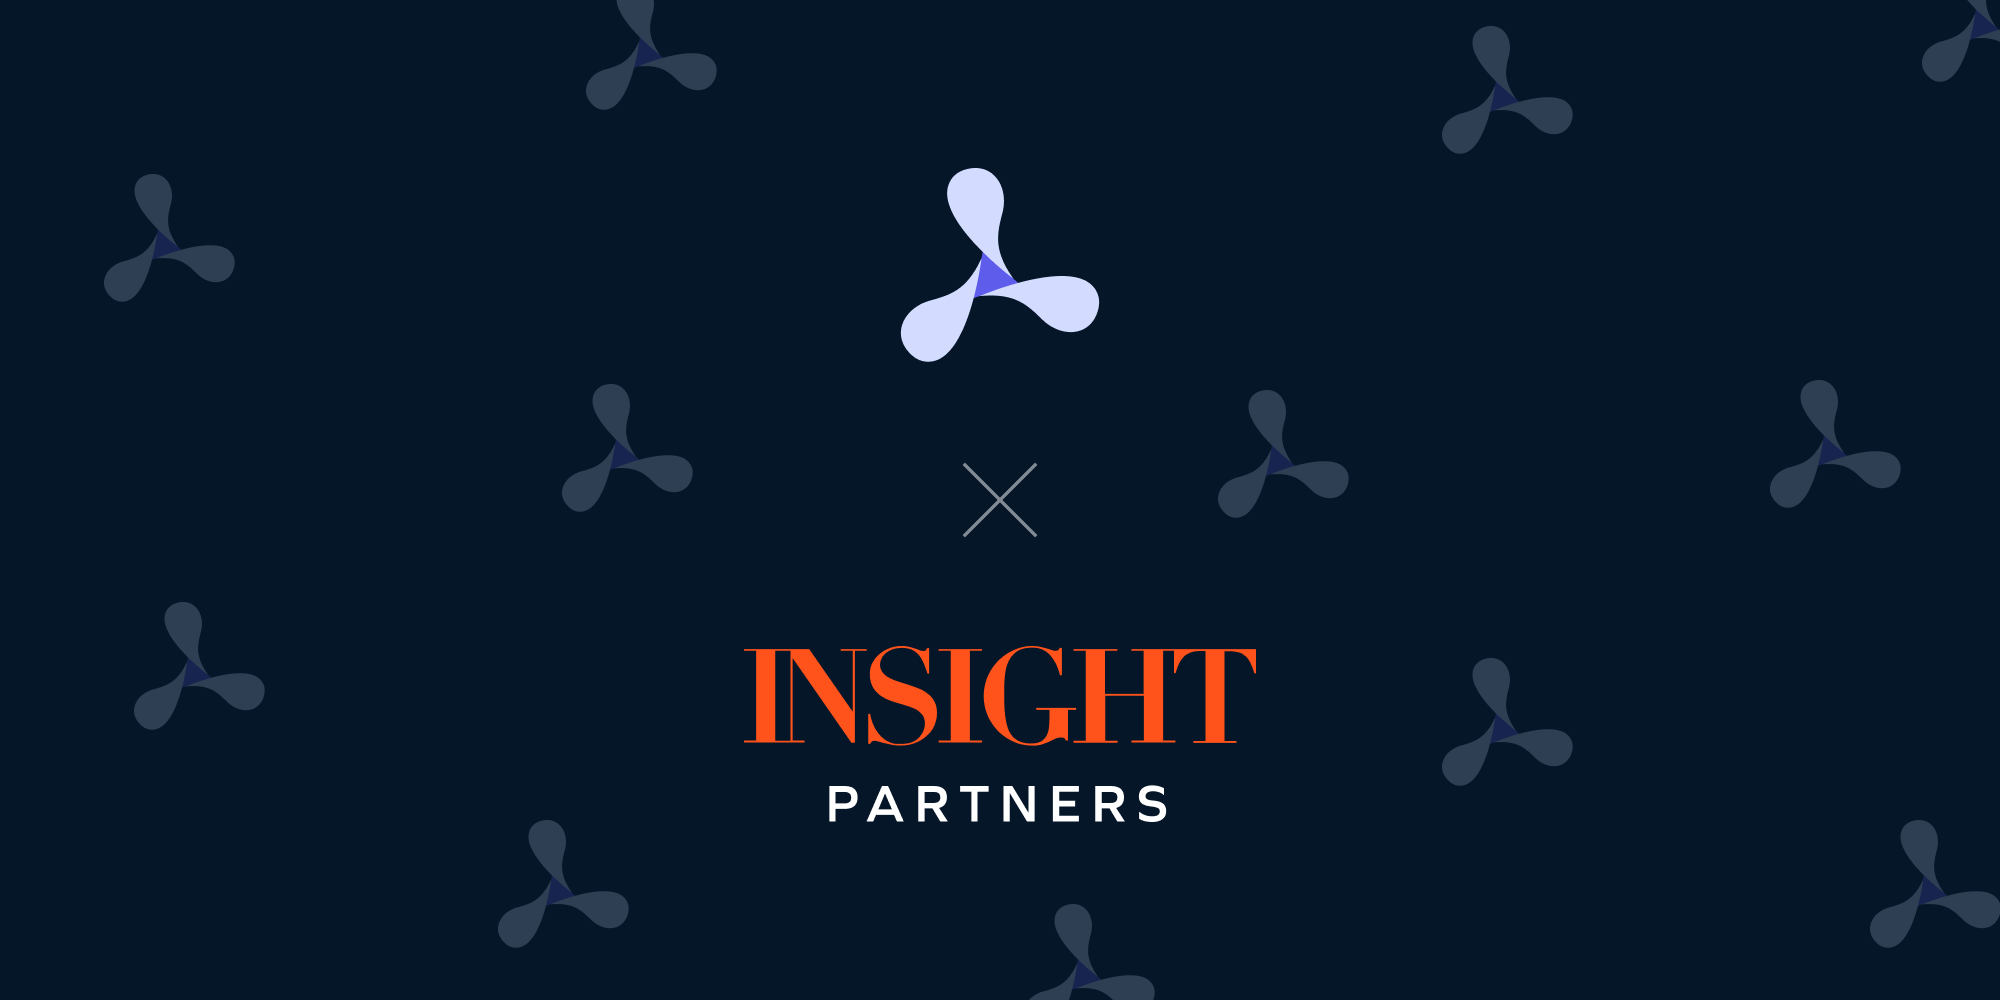 Illustration: PSPDFKit Announces &euro;100 Million Strategic Investment From Insight Partners to Fuel Growth